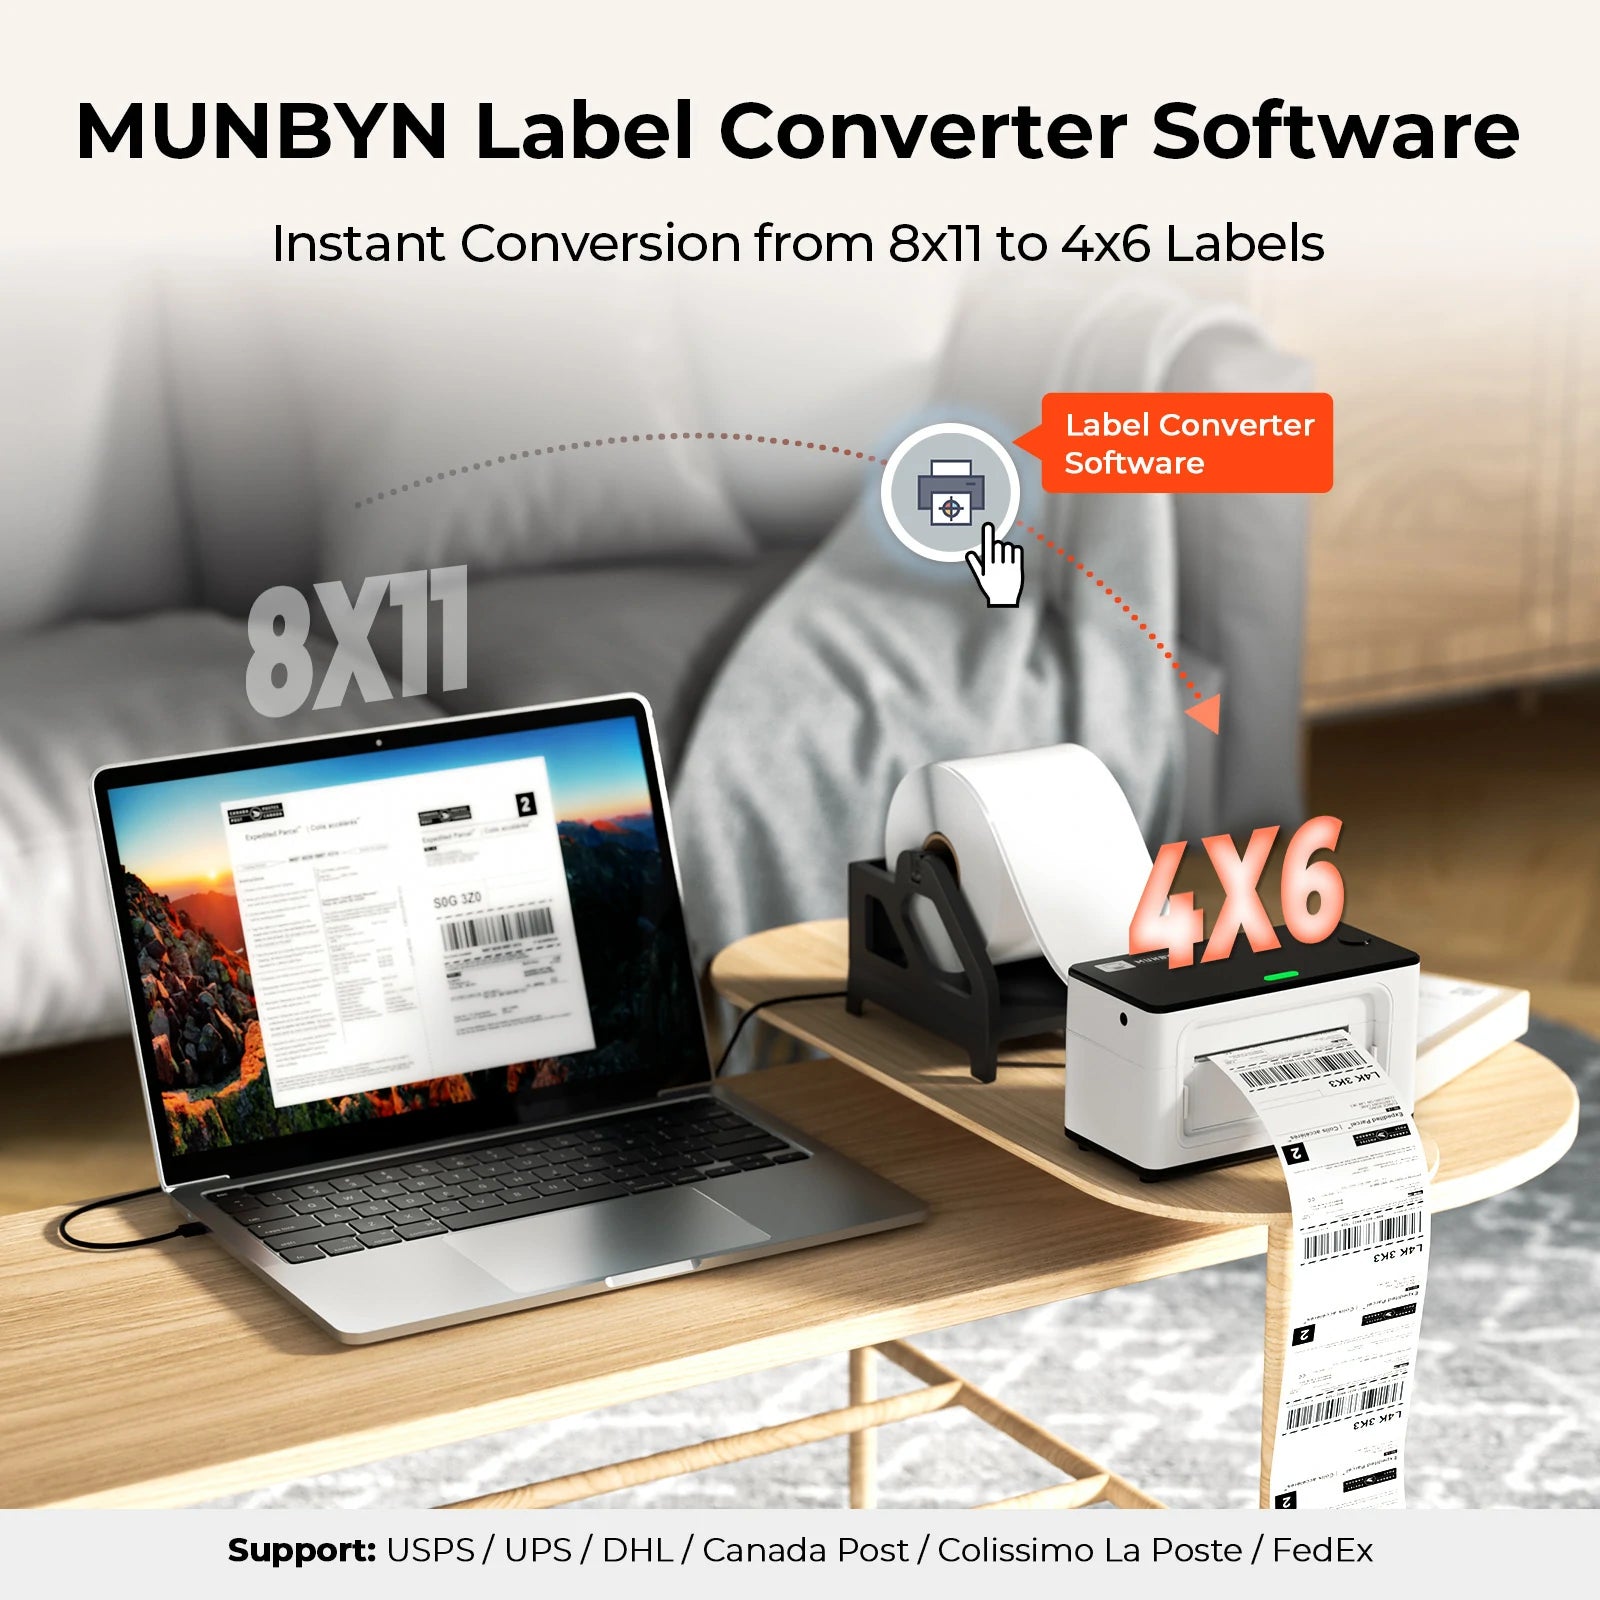 MUNBYN P941B wireless Bluetooth label printer is compatible with various selling and shipping platforms, such as UPS, DHL, Canada Post, USPS, and FedEx, converting 8x11 label to 4x6 label.